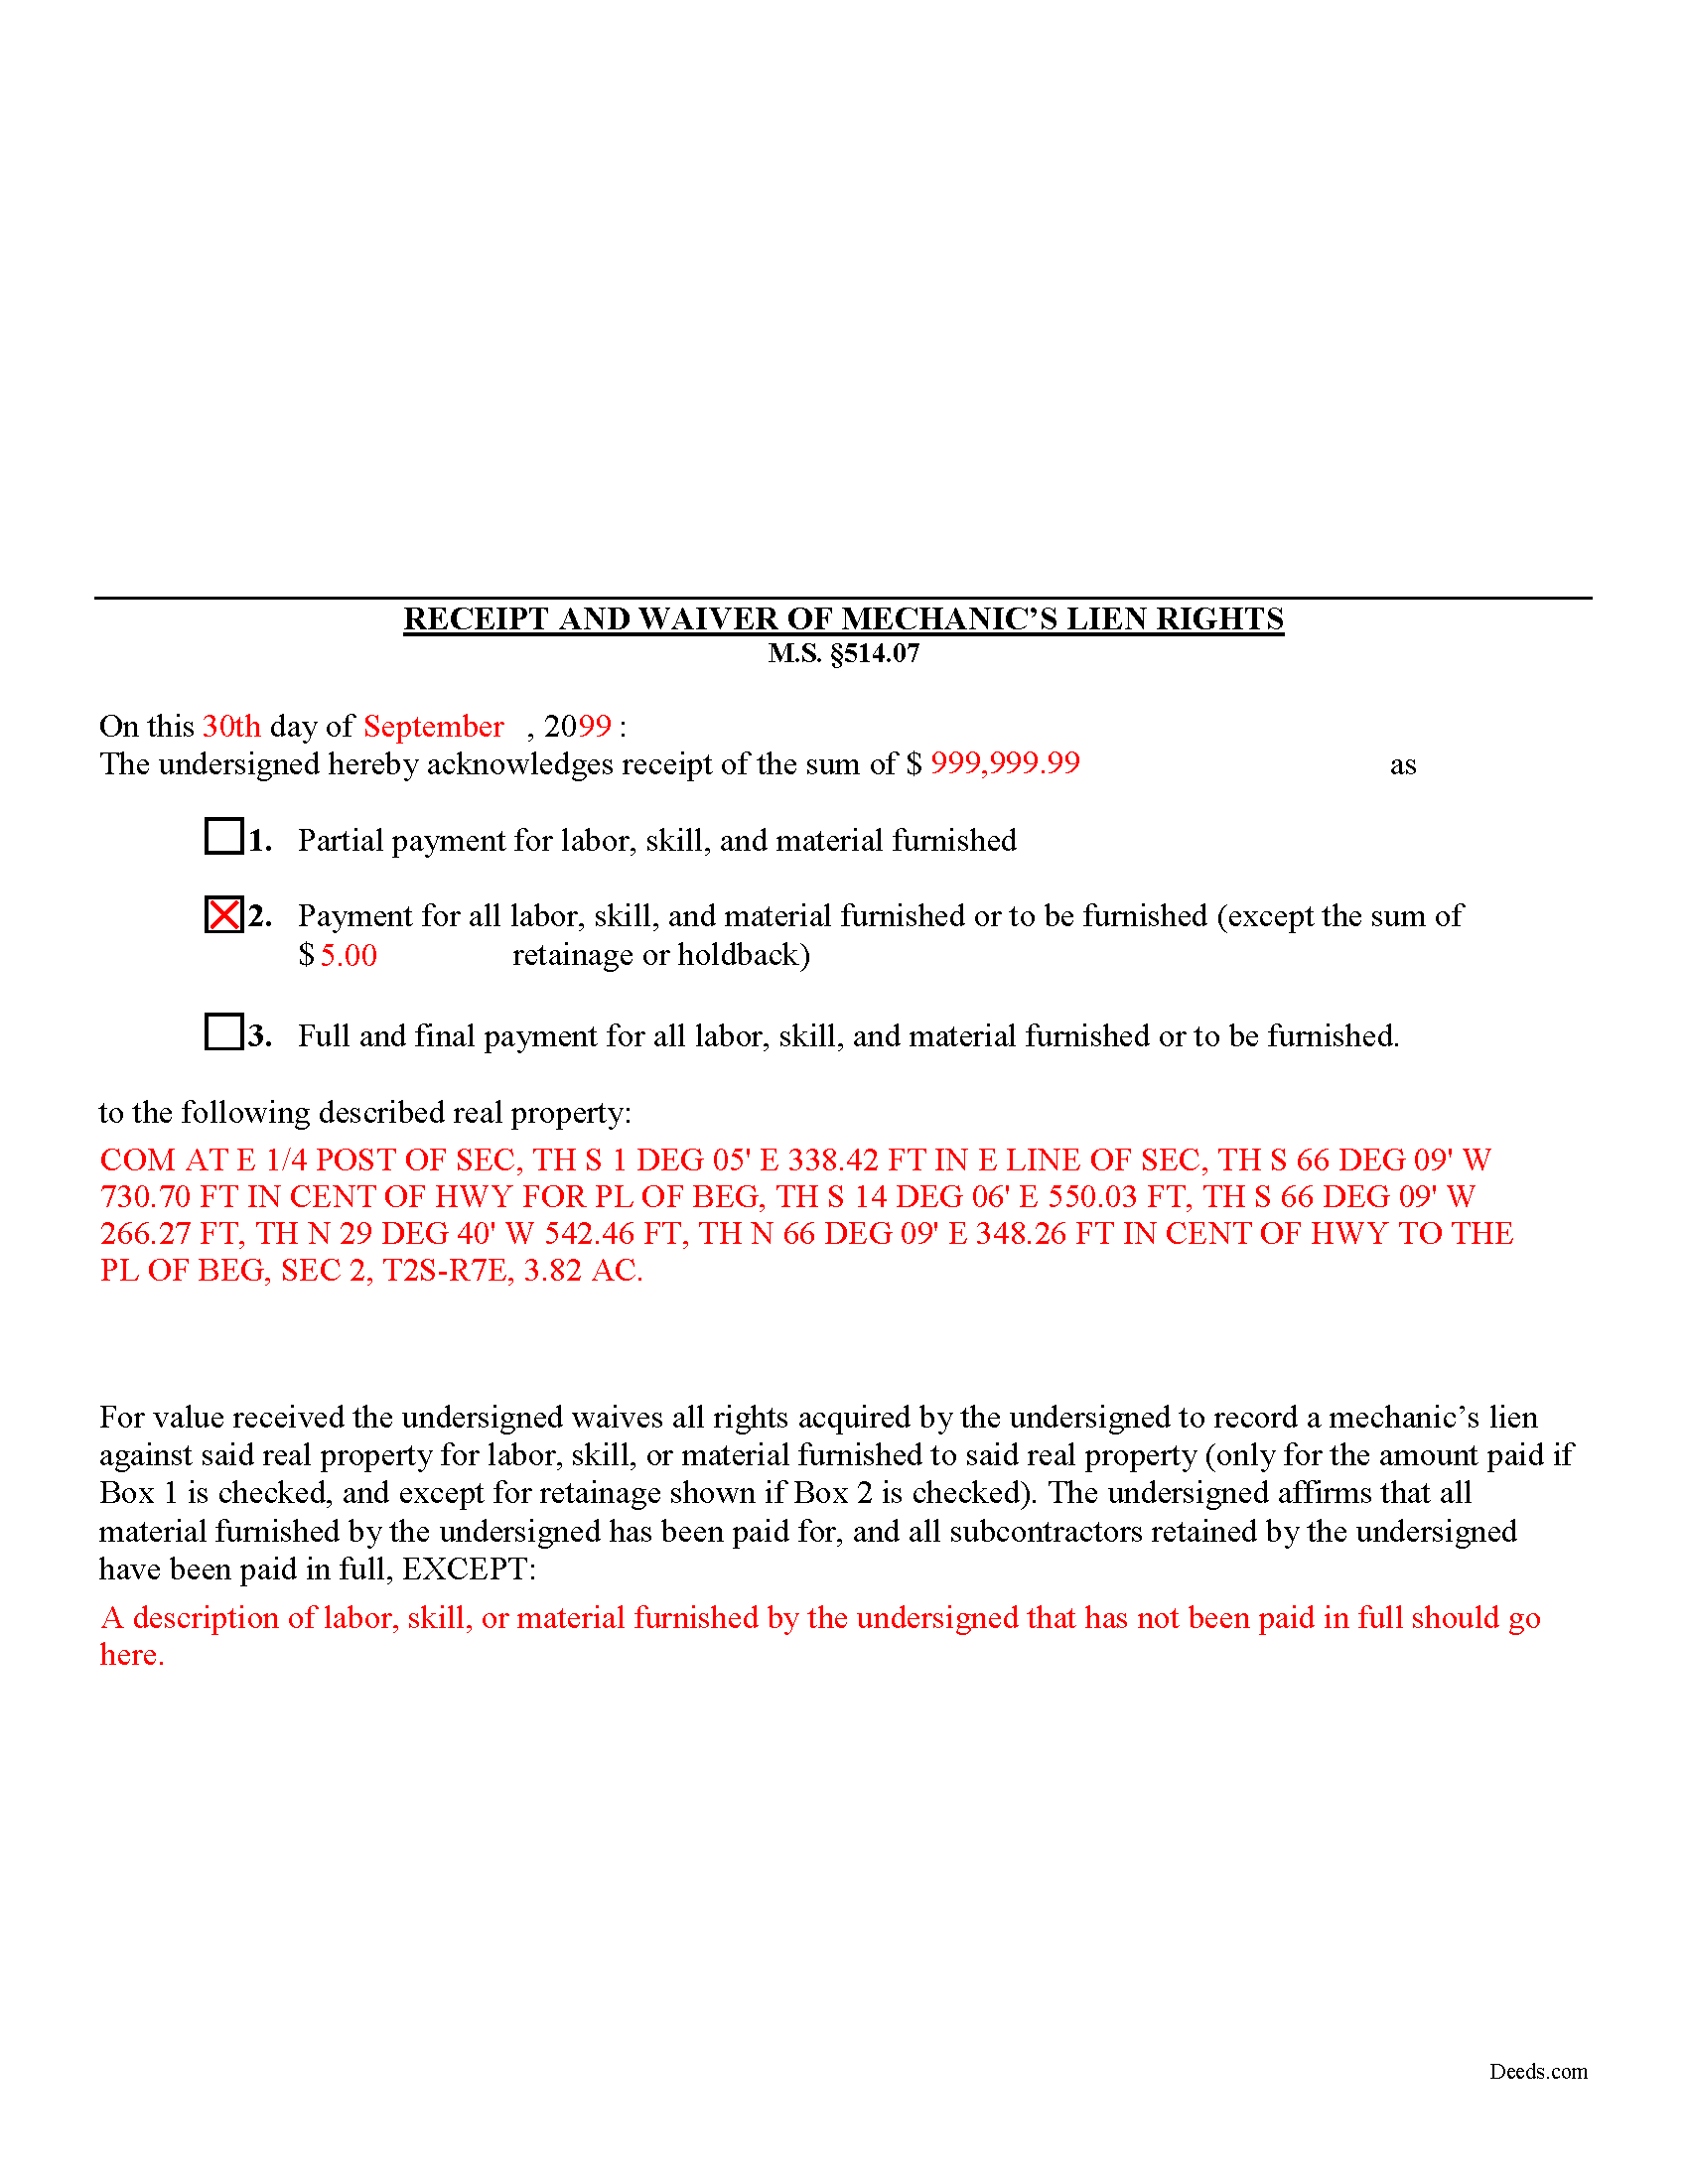 Completed Example of the Receipt and Waiver of Mechanic Lien Document